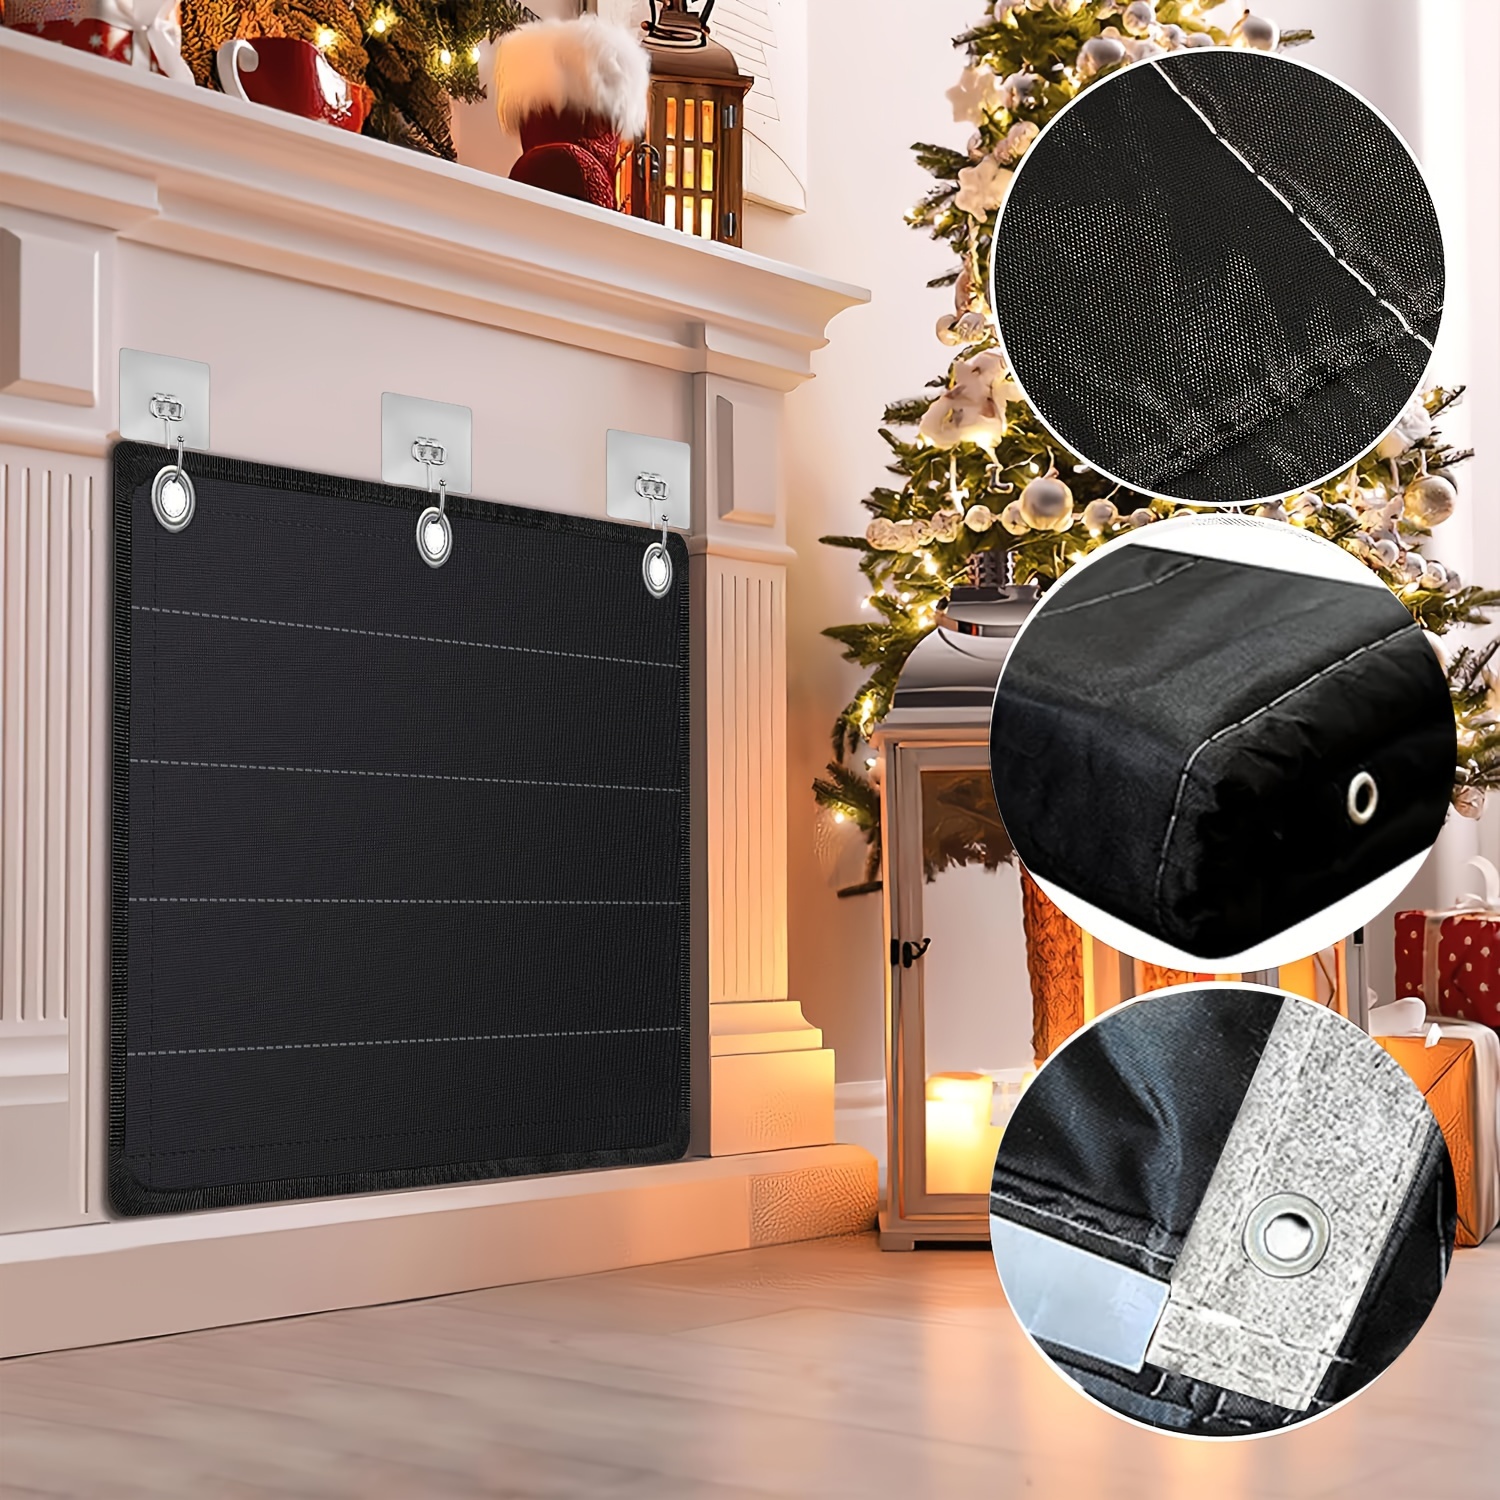 High Quality Fireplace Blocker Blanket Prevents Heat Loss Overnight Chimney  Draft Stopper Saves Energy Fireplace Cover Black - AliExpress